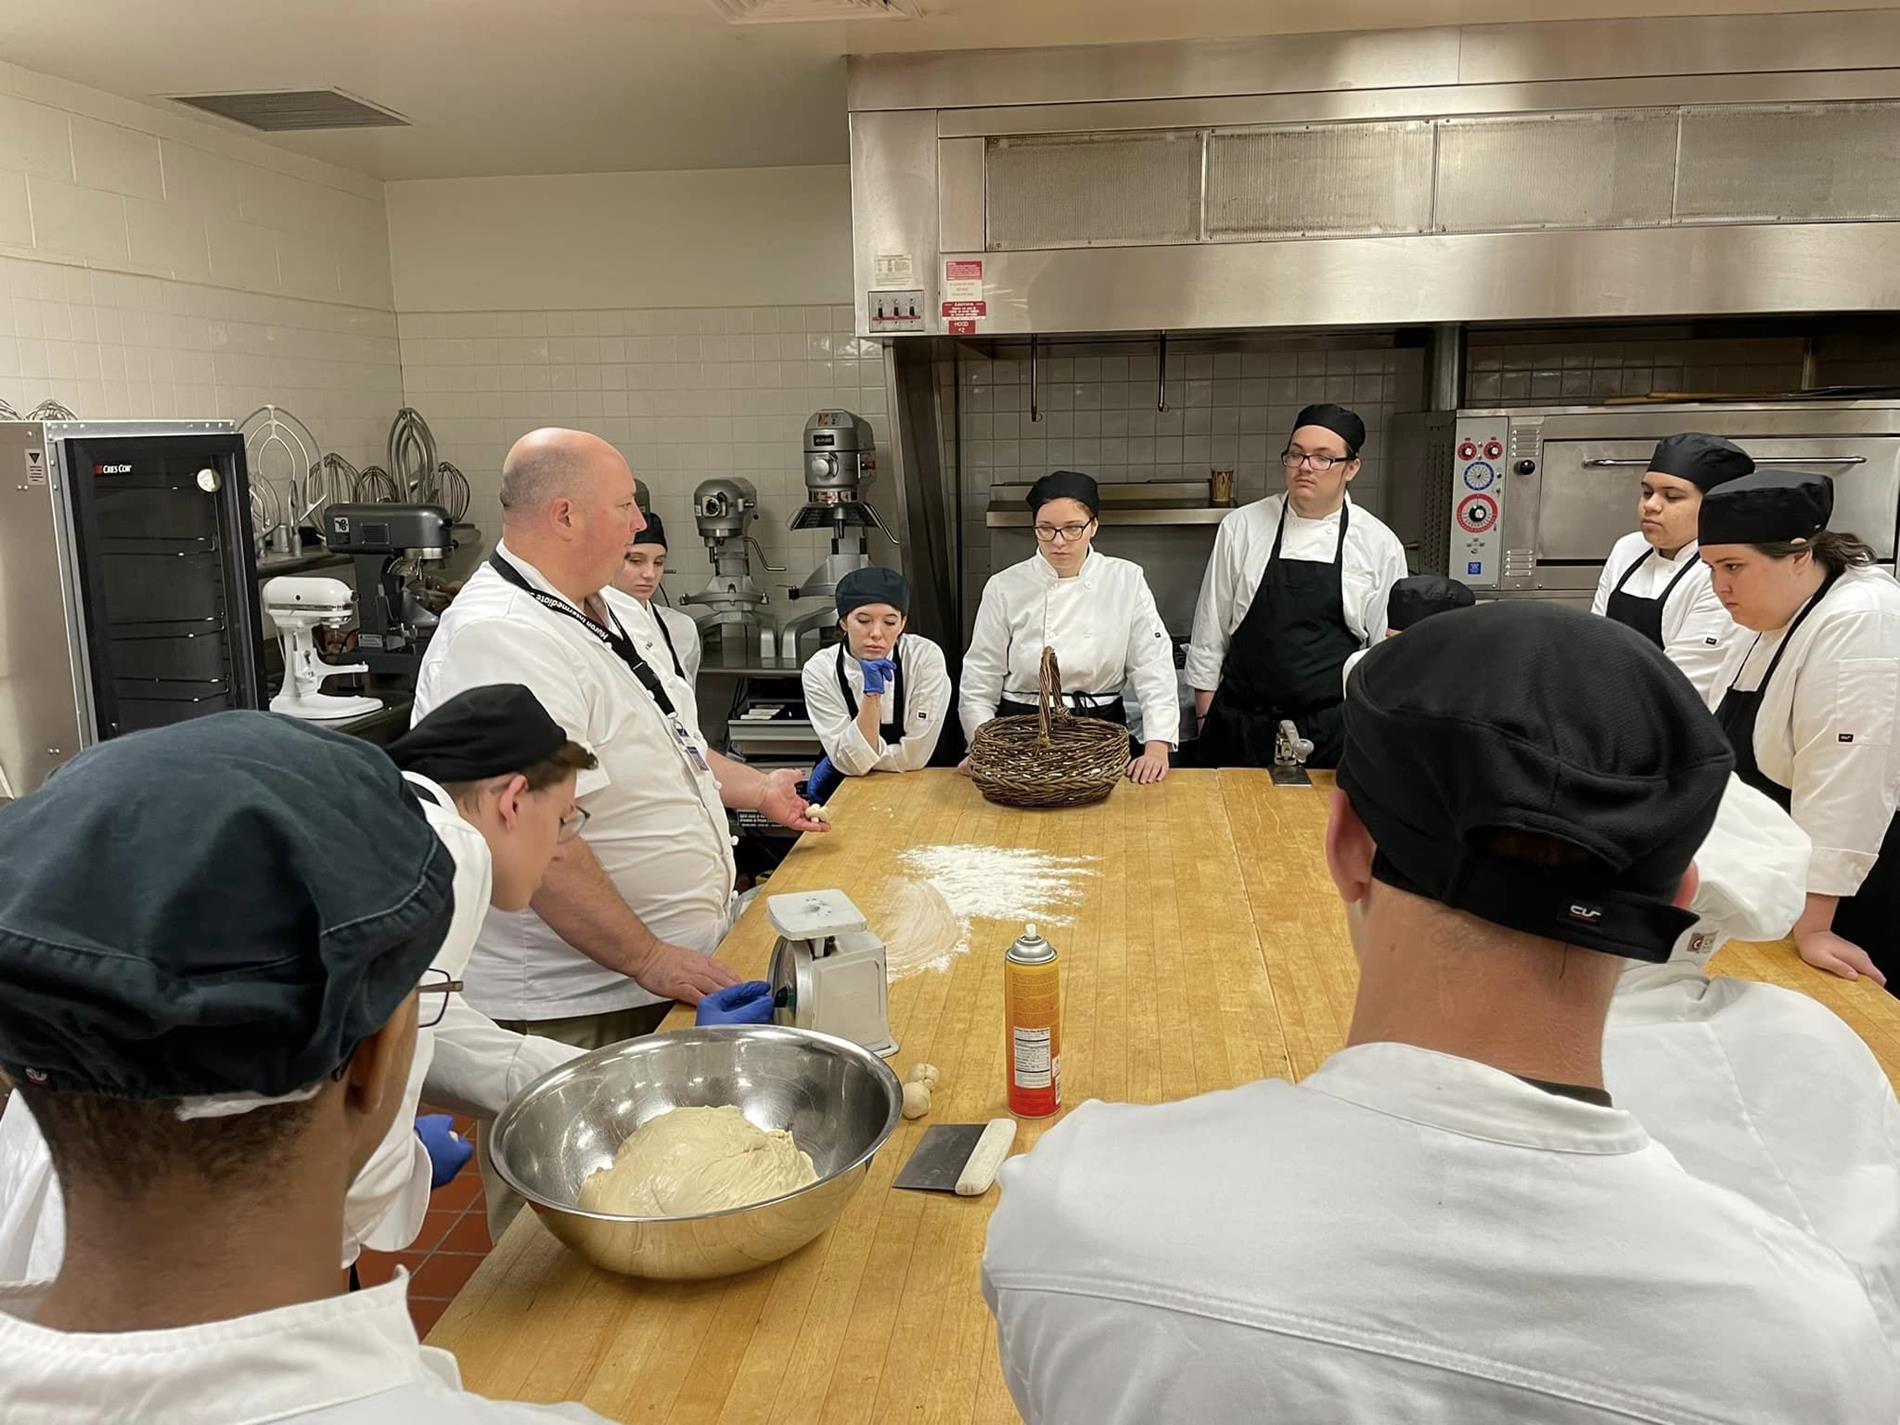 Mr. Miles working with students in the kitchen